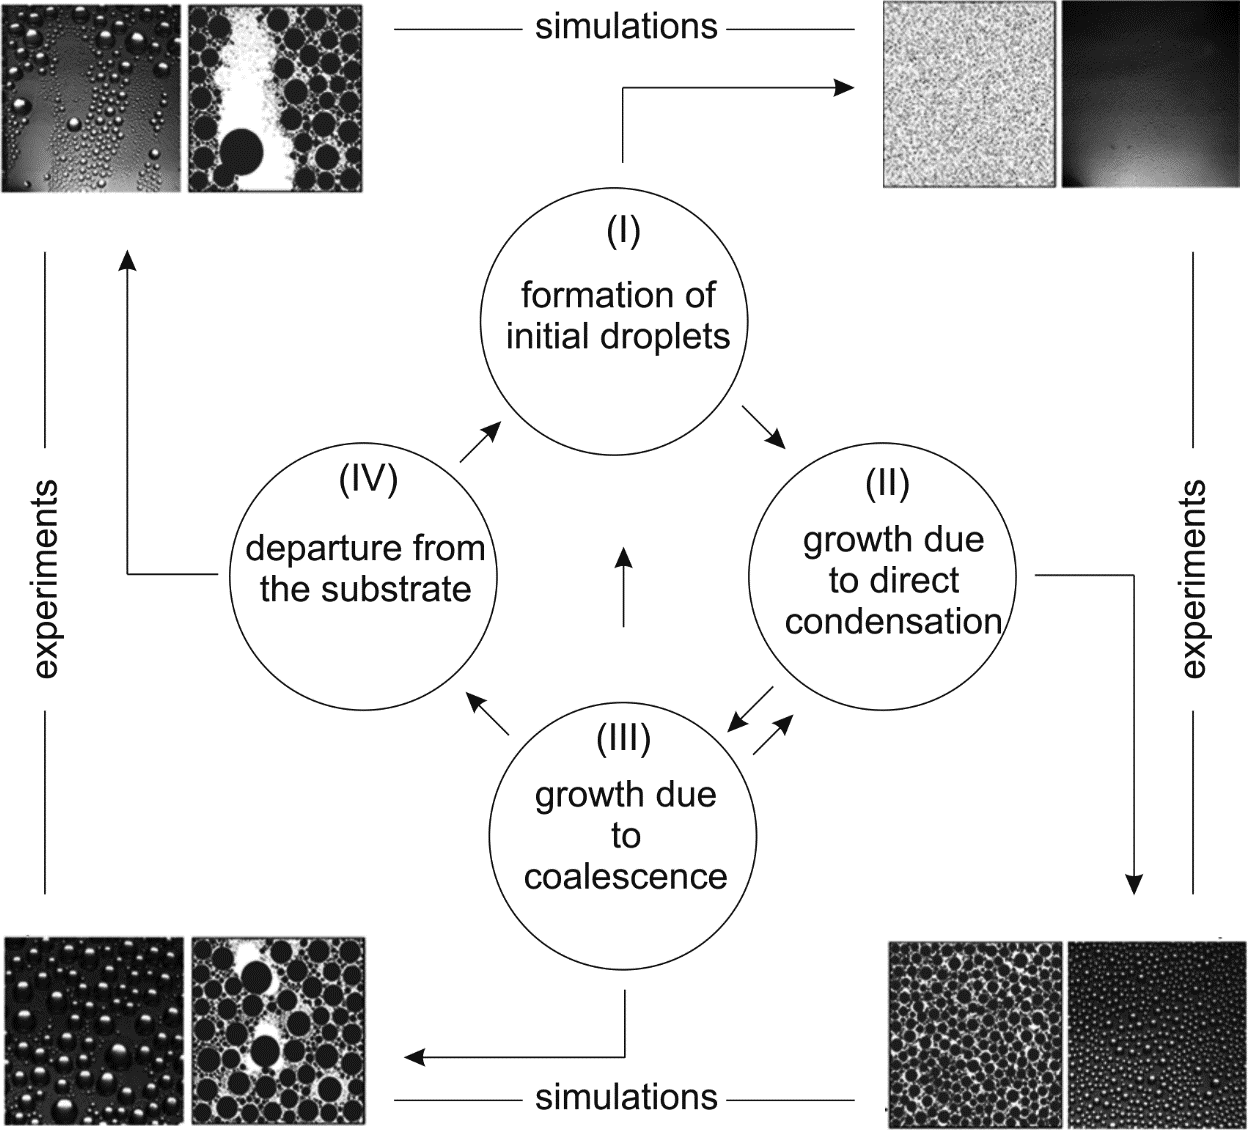 Schematic of the space- and time-resolved dropwise condensation model that proceeds cyclically along steps I-IV, i.e., nucleation to gravitational instability.